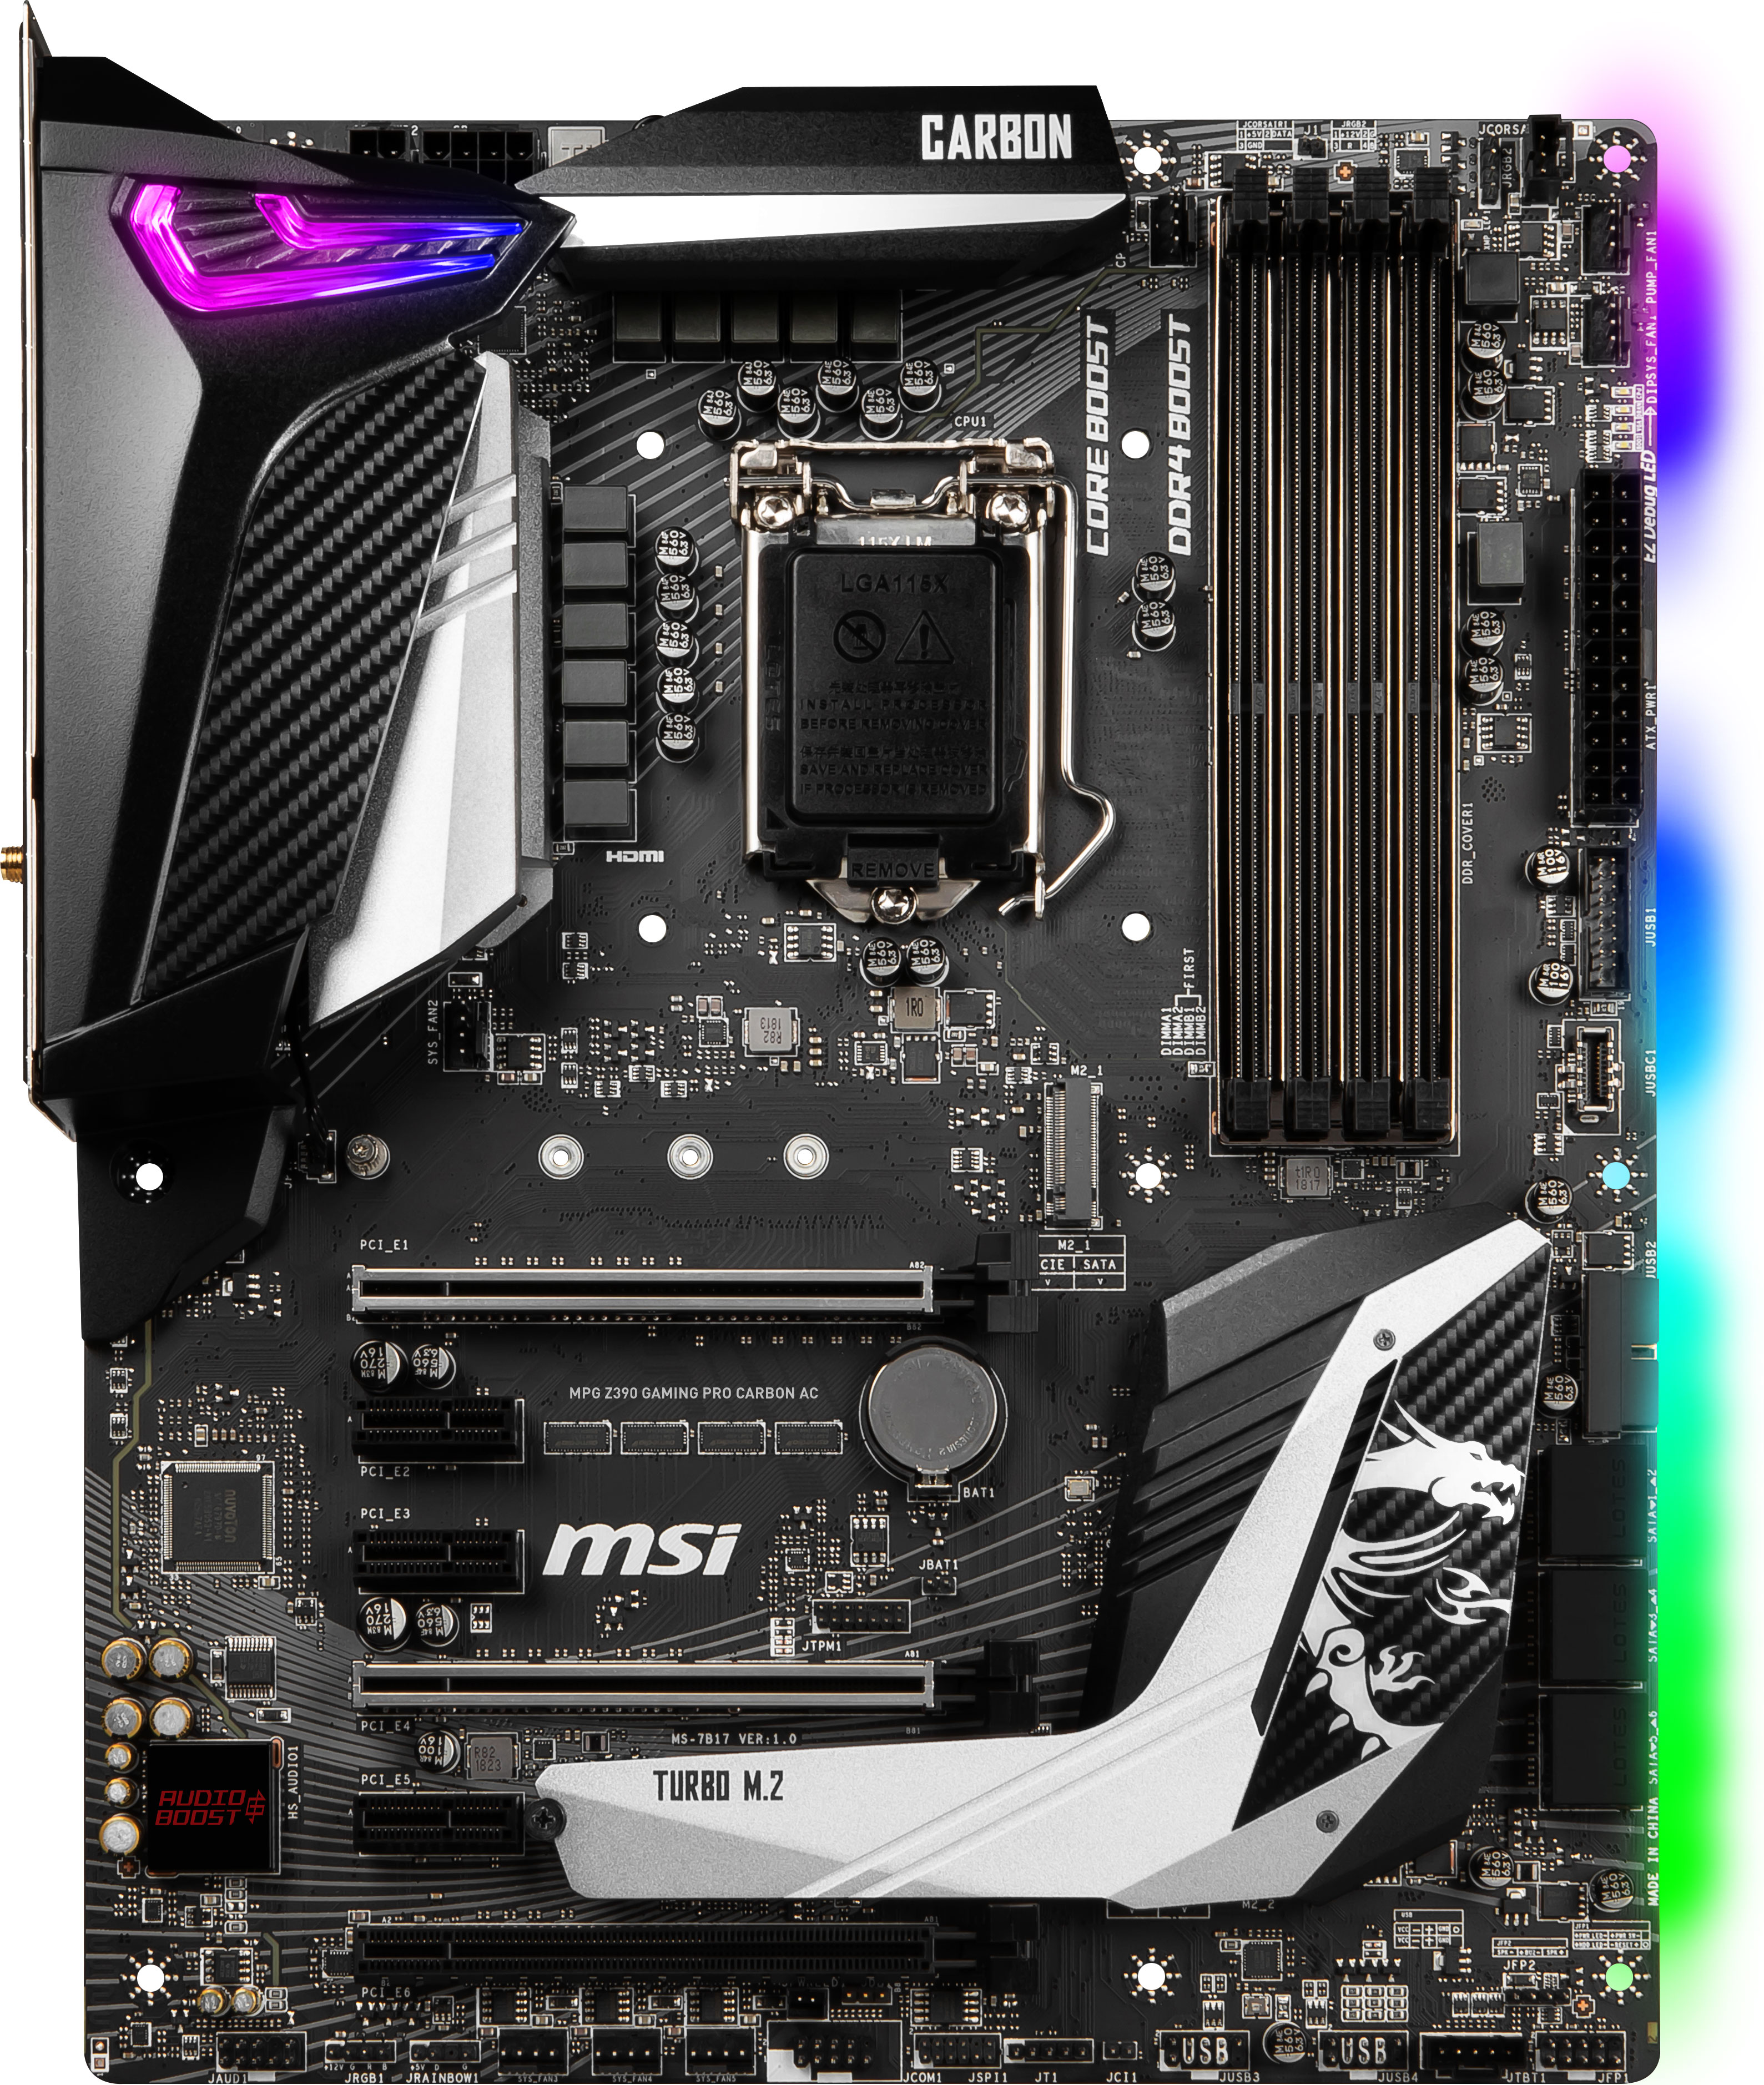 Msi Mpg Z390 Gaming Pro Carbon Ac Intel Z390 Motherboard Overview 50 Motherboards Analyzed